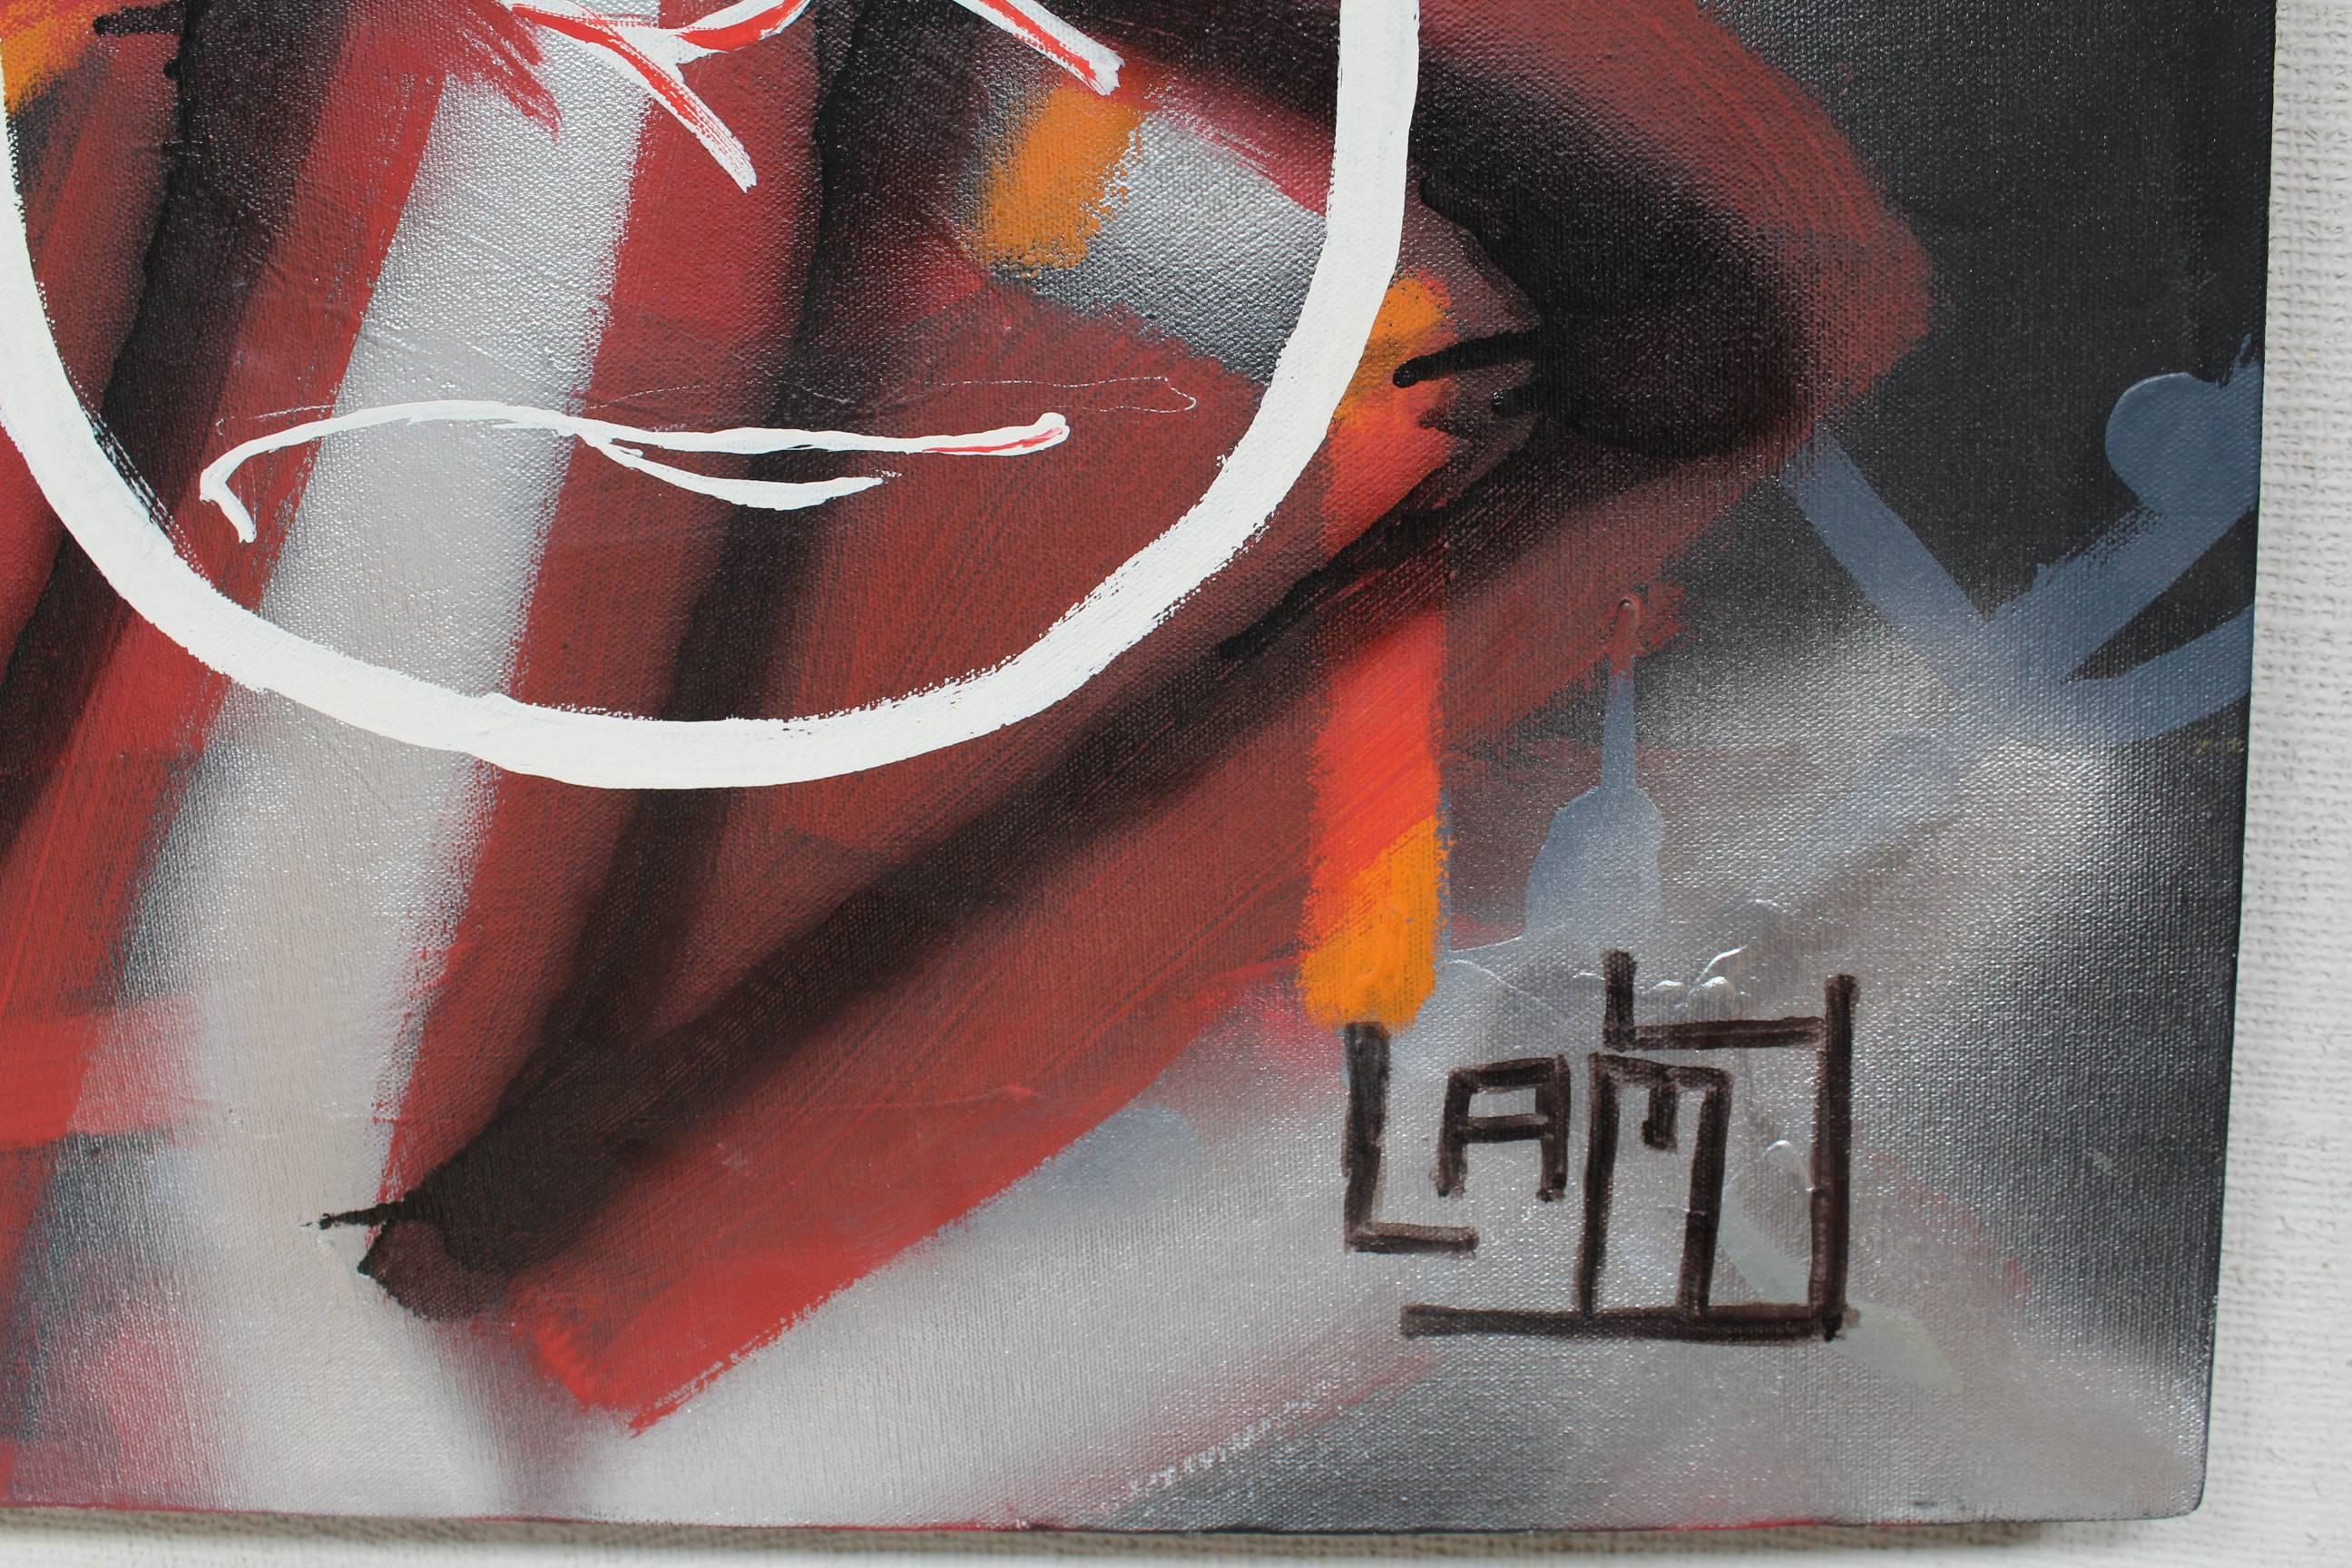 Large and vibrant abstract painting by contemporary artist Lionel Lamy. Acrylic, spray paint and oil stick on canvas.